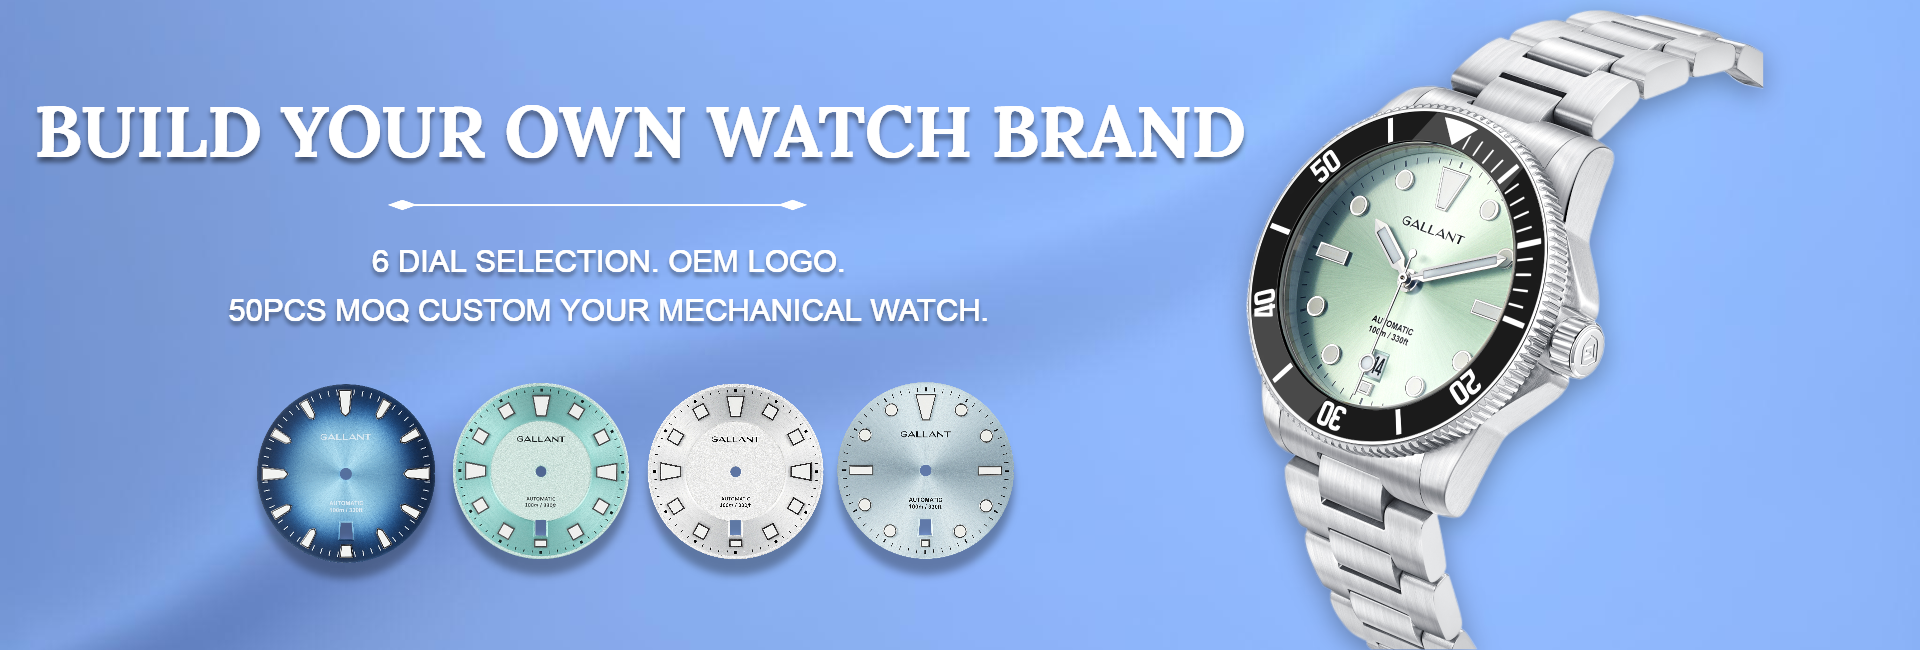 Promotion Watches